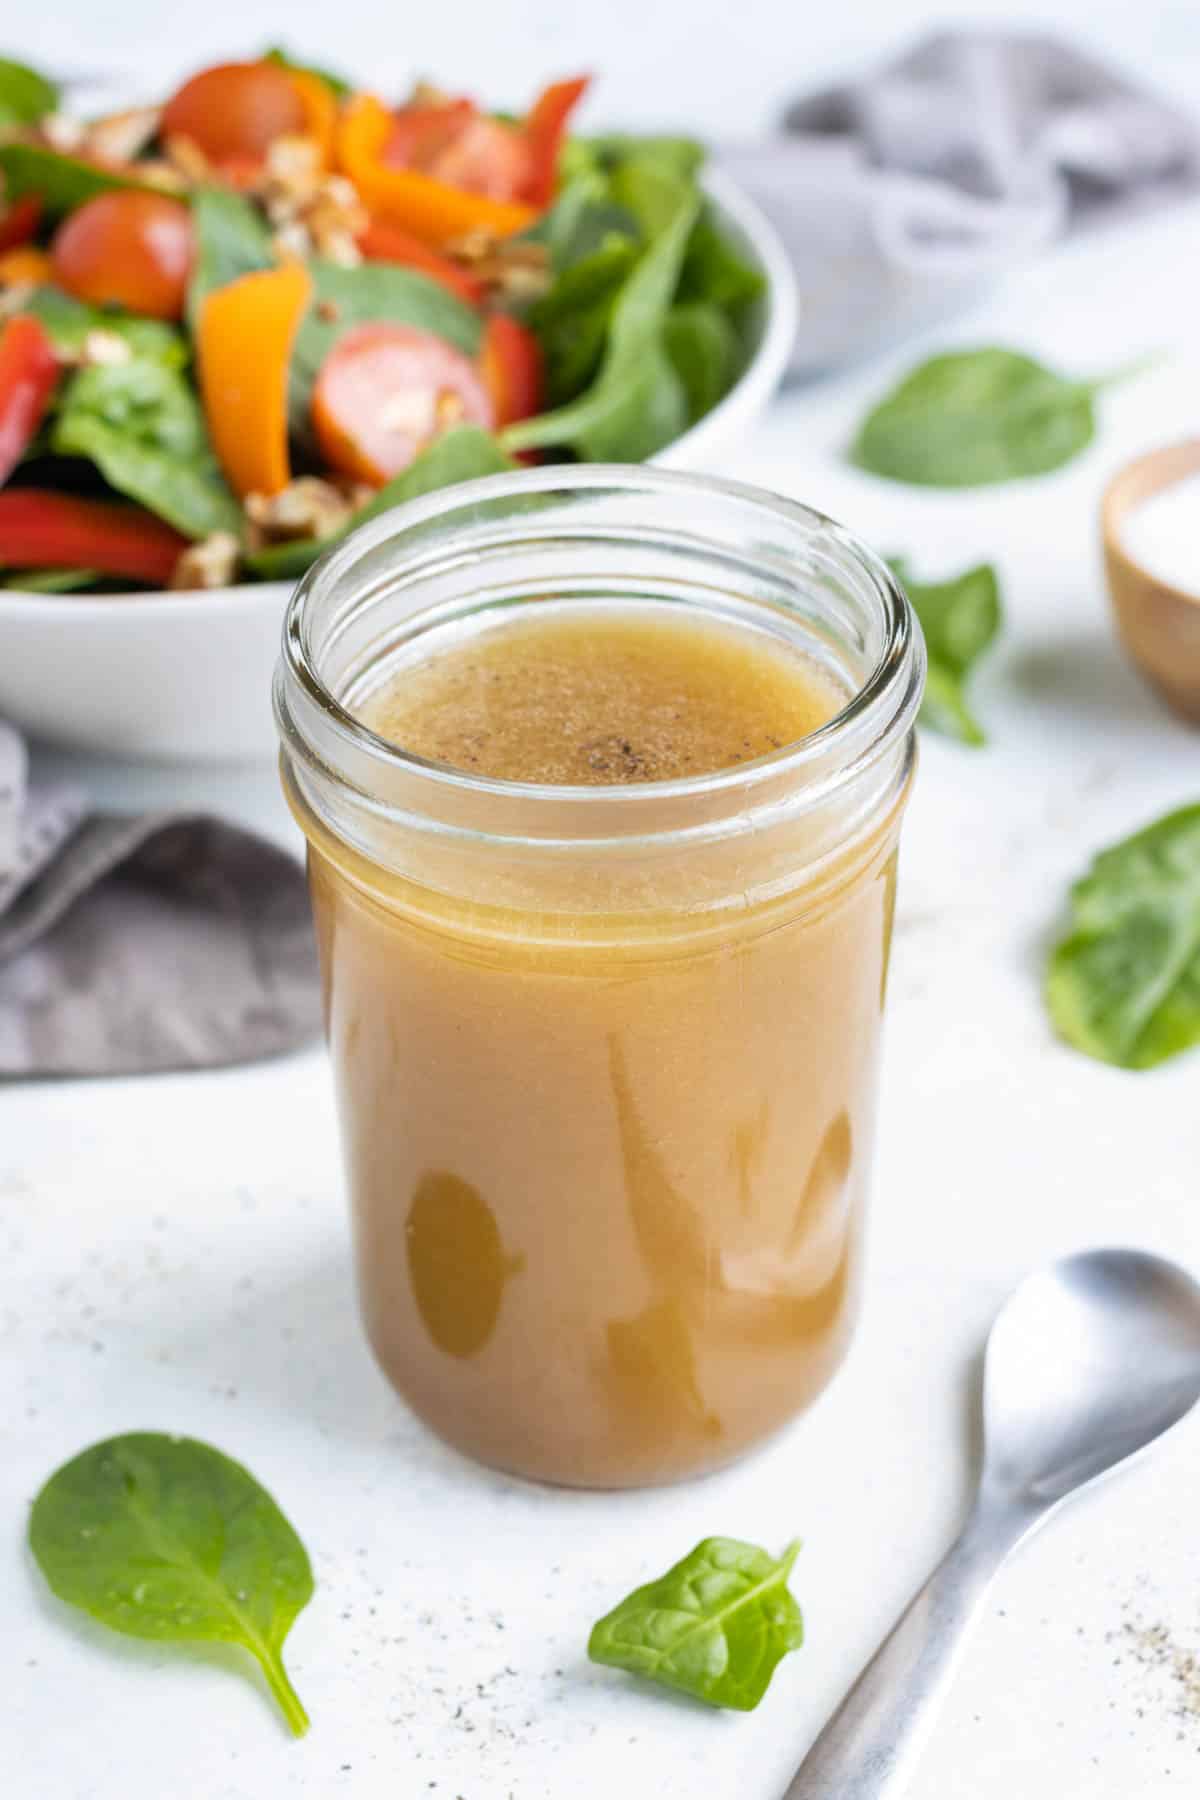 Apple cider vinaigrette is healthy and easy to make.